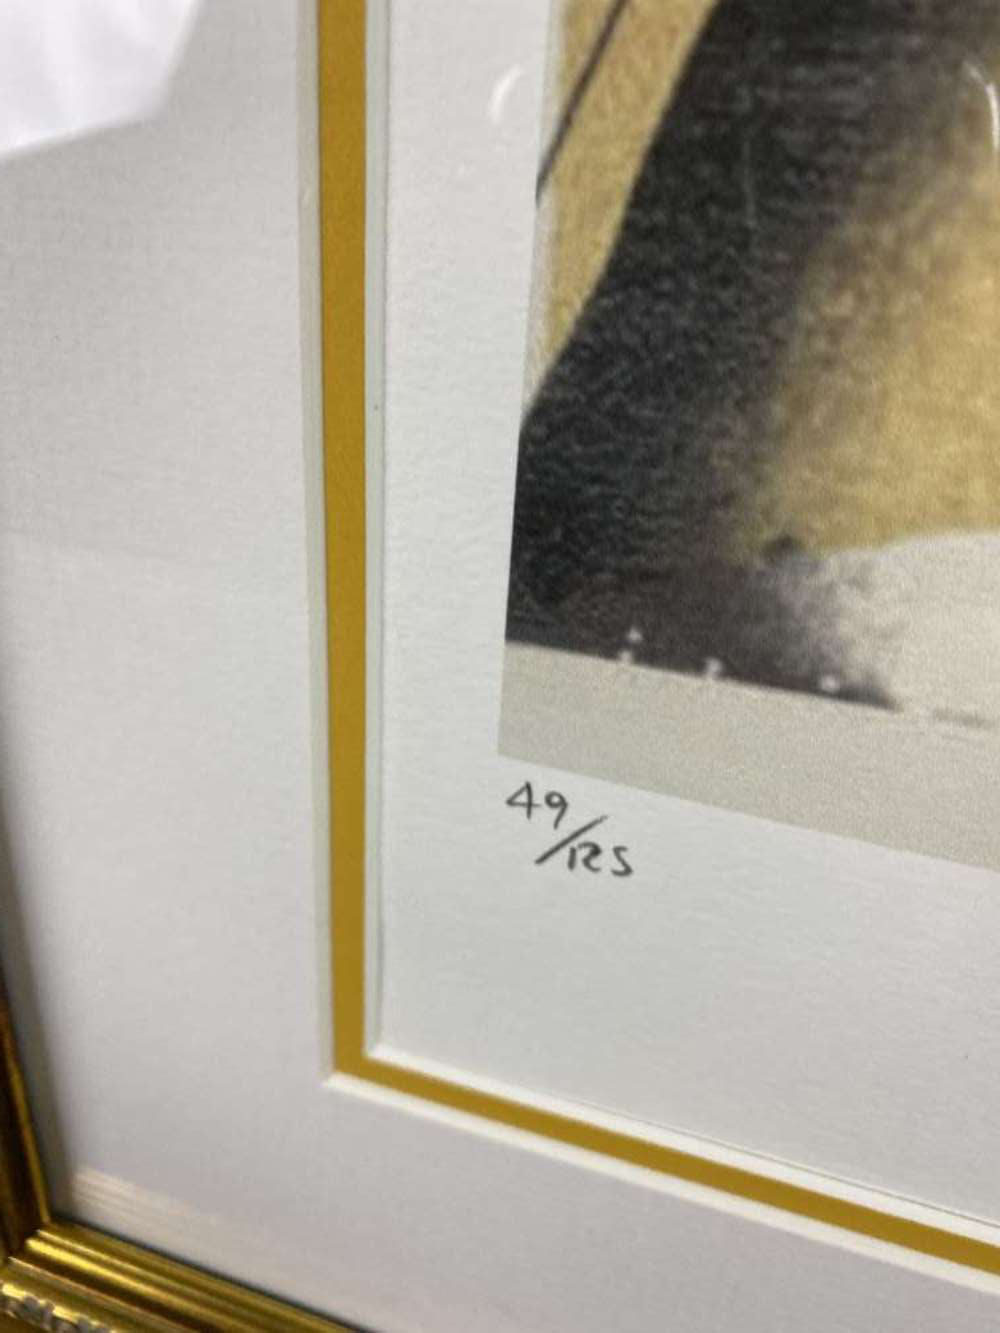 Andy Warhol (1928-1987) “Jagger” Numbered Ltd Edition of 125 Lithograph #49, Ornate Framed. - Image 3 of 8